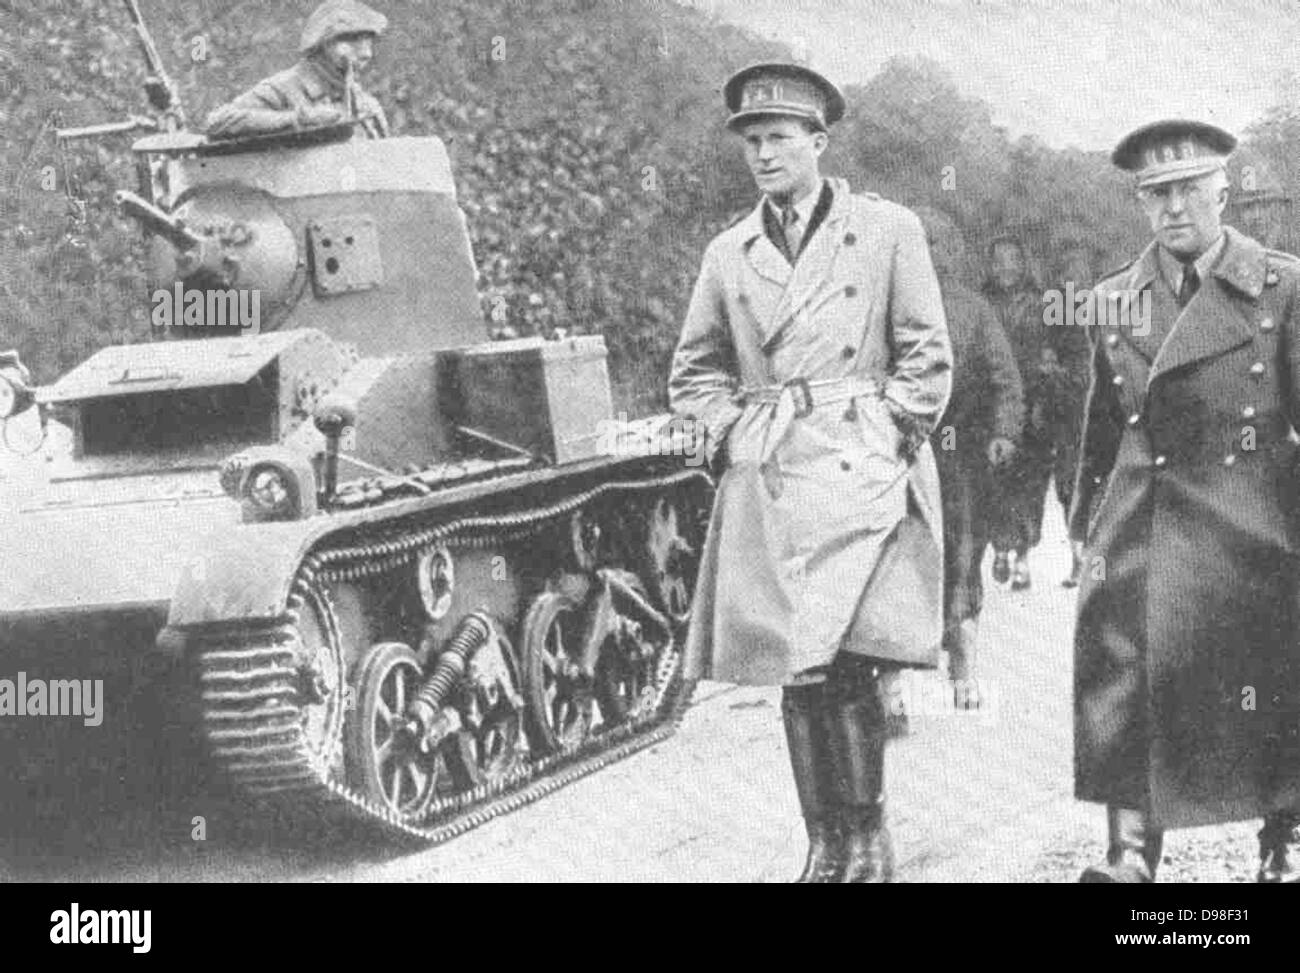 Leopold III of Belgium, 1901 – 1983 King of the Belgians from 1934 - 1951, when he abdicated. King Leopold with his War Minister General Denys attending pre war manoeuvres circa 1938. d Stock Photo